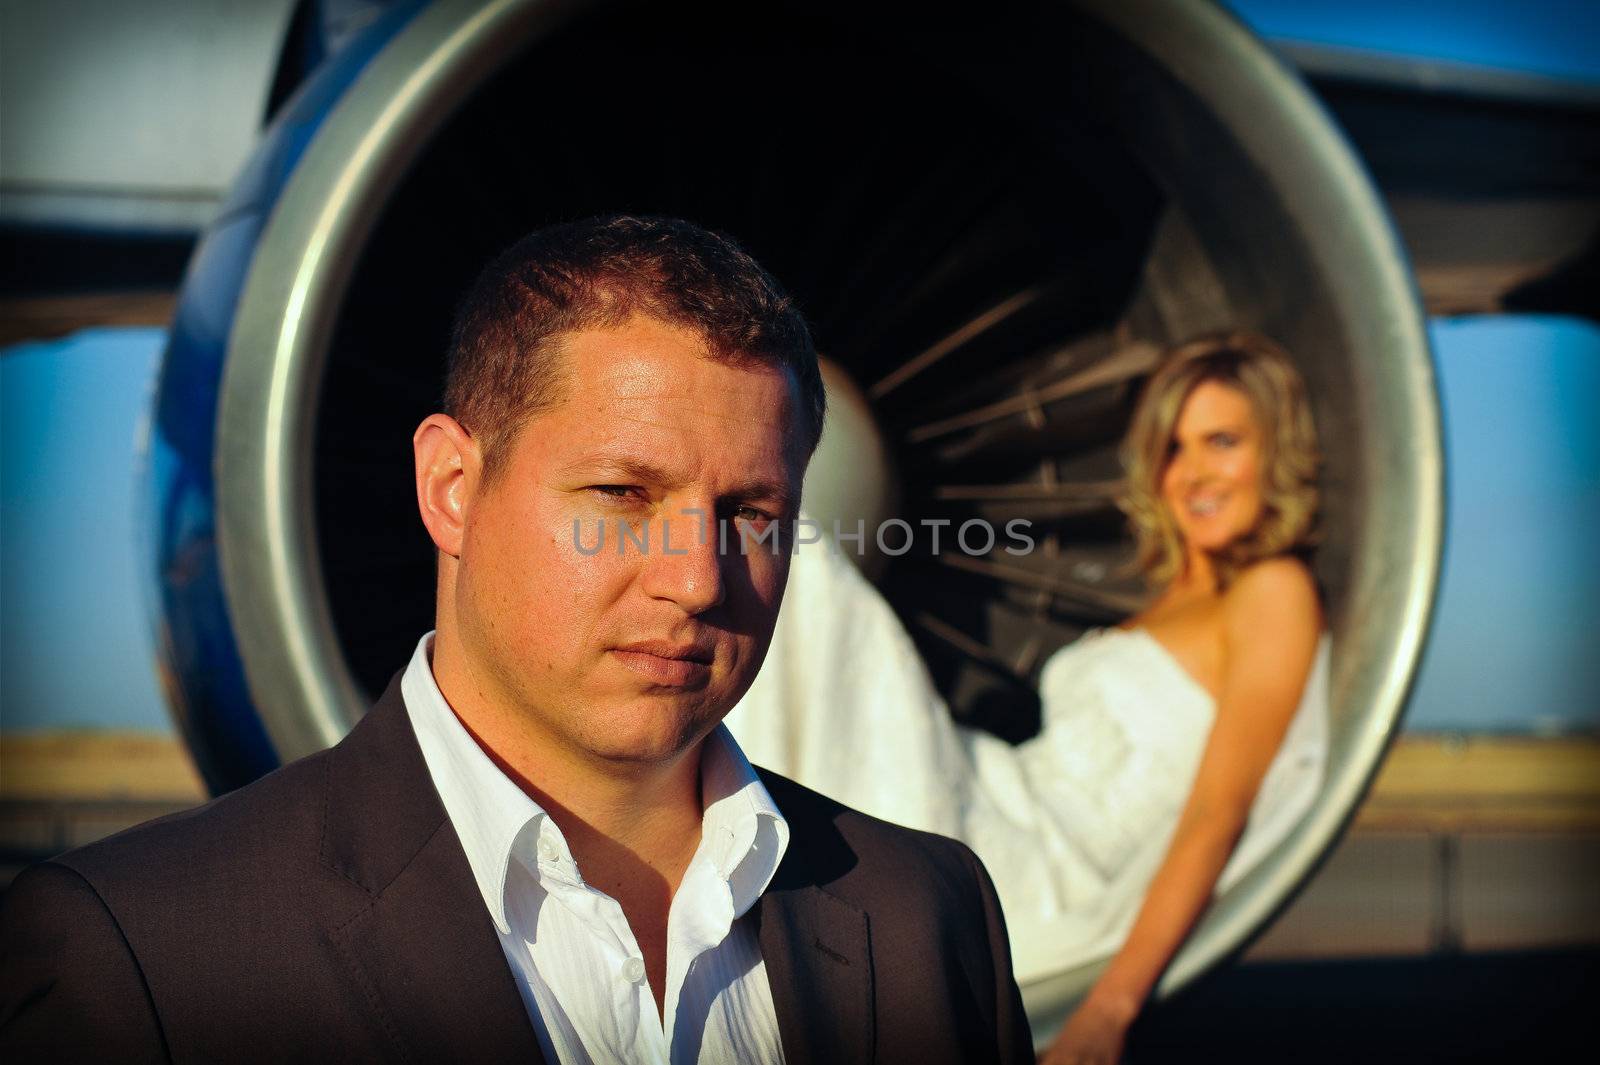 sexy young adult wedding couple laying inside the engine intake of Boeing passenger aircraft with groom in front